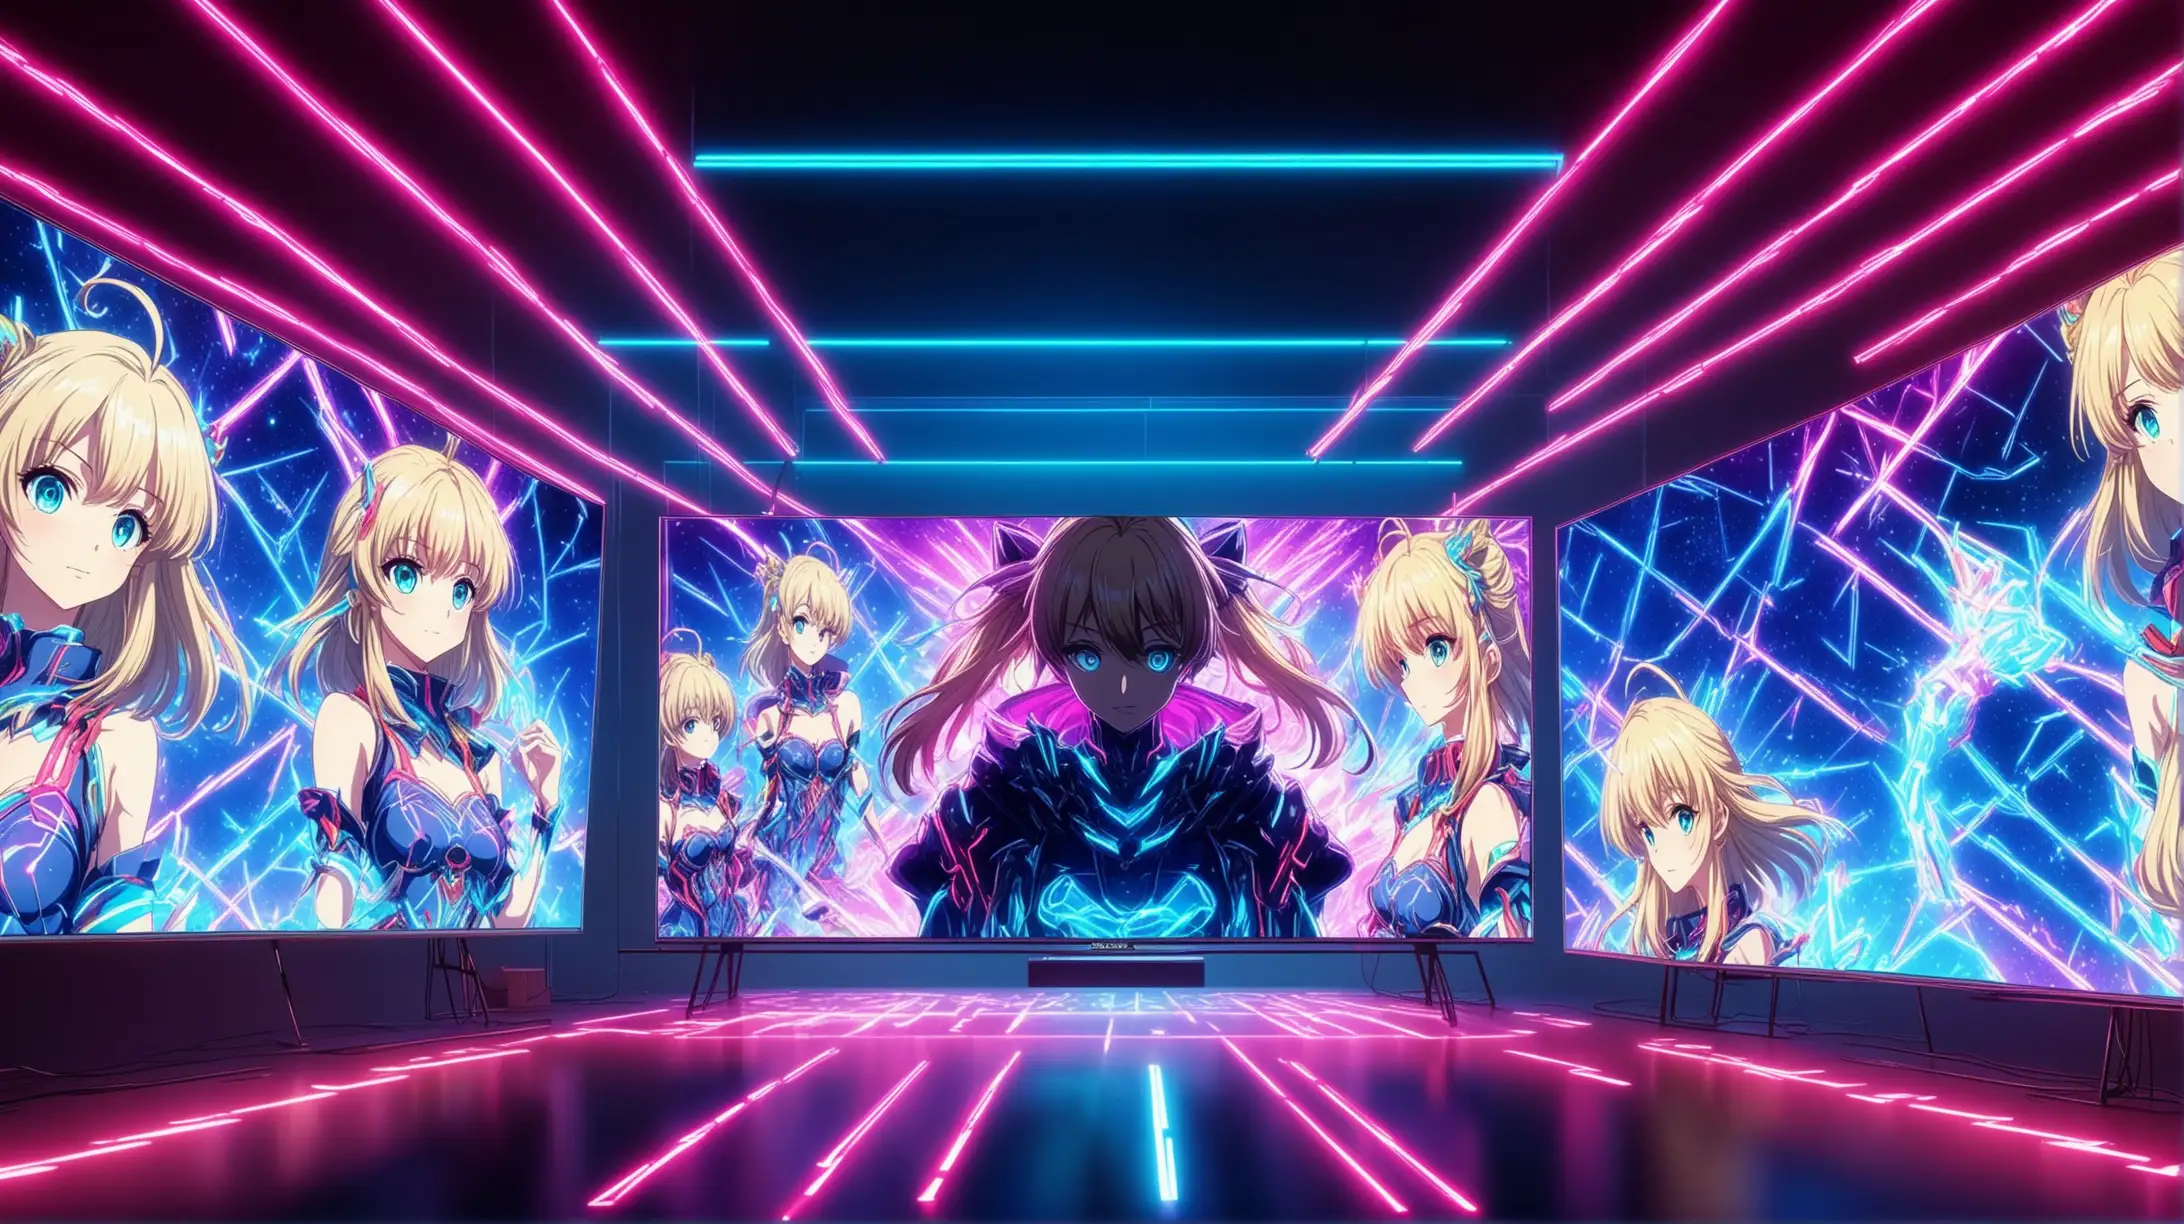 Neon Anime Spectacle Highly Anticipated 8K Resolution Scene